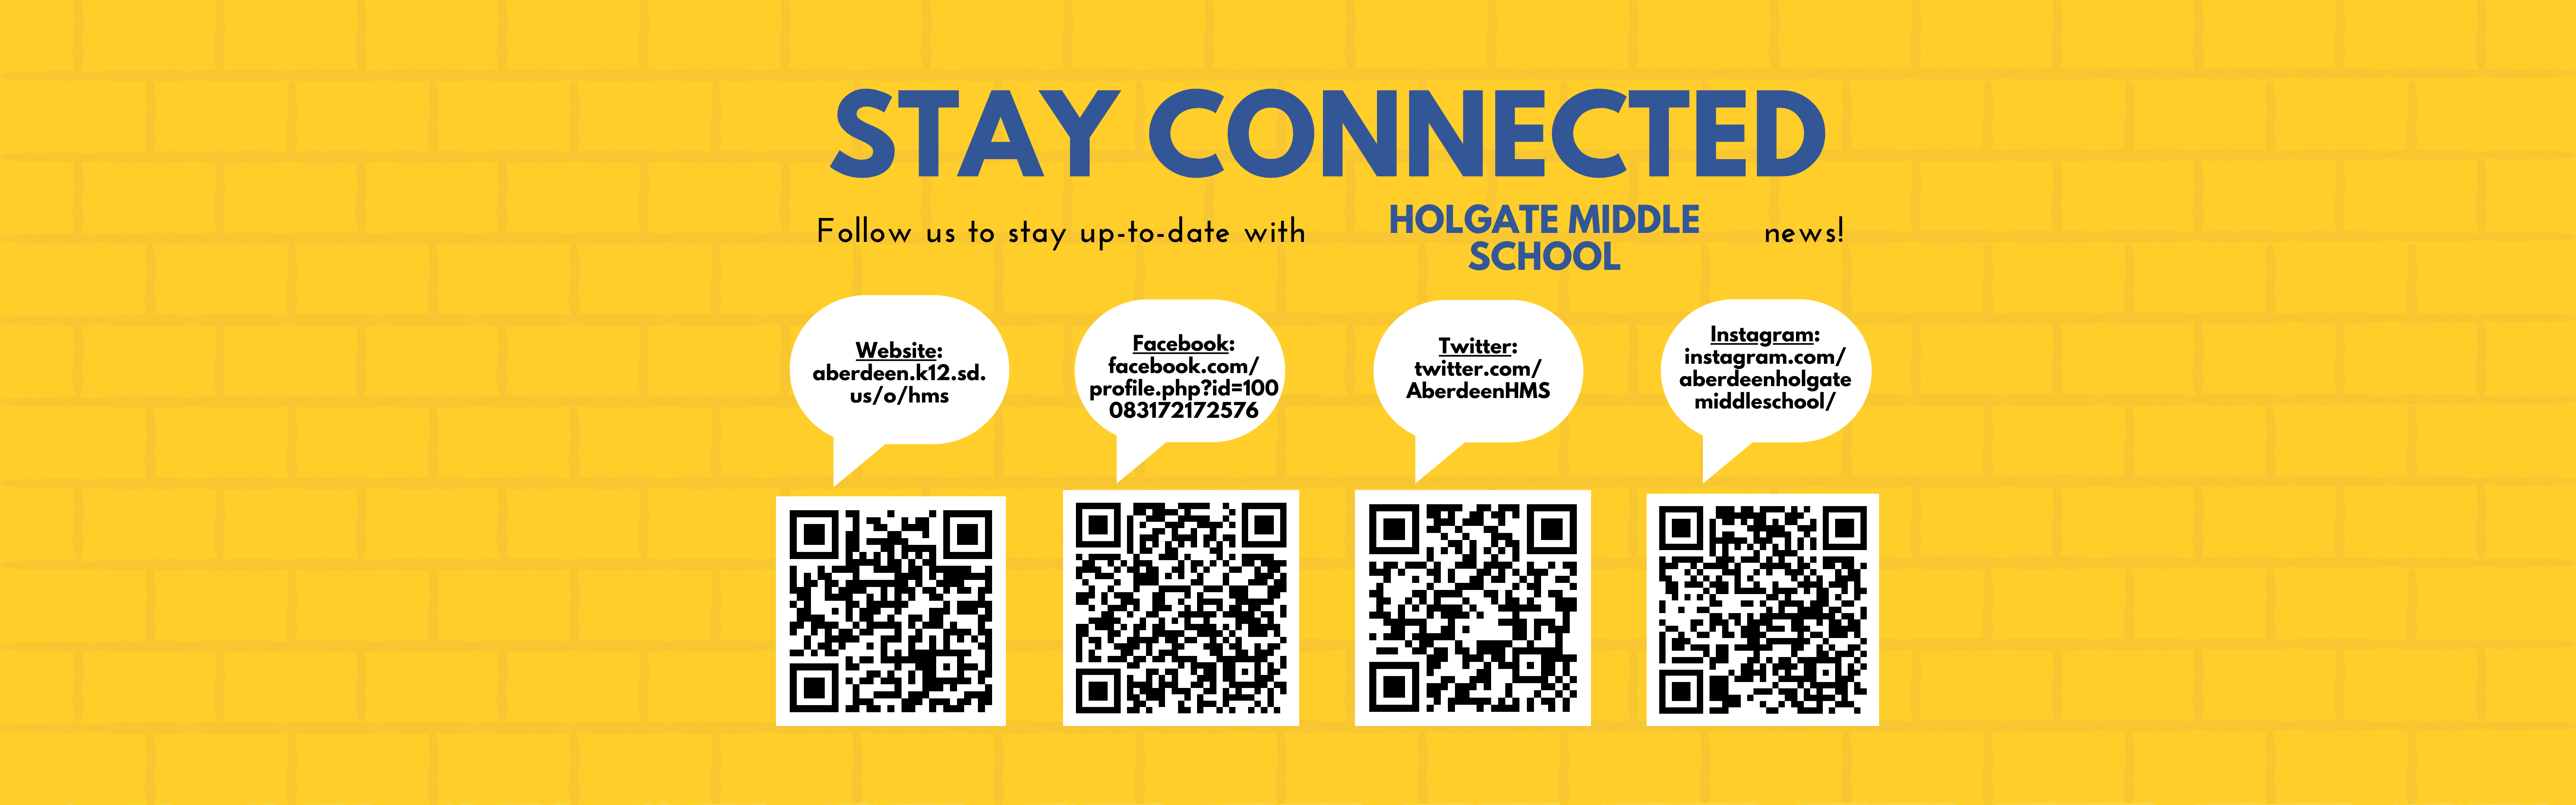 Stay Connected graphic with QR codes linking to HMS social media